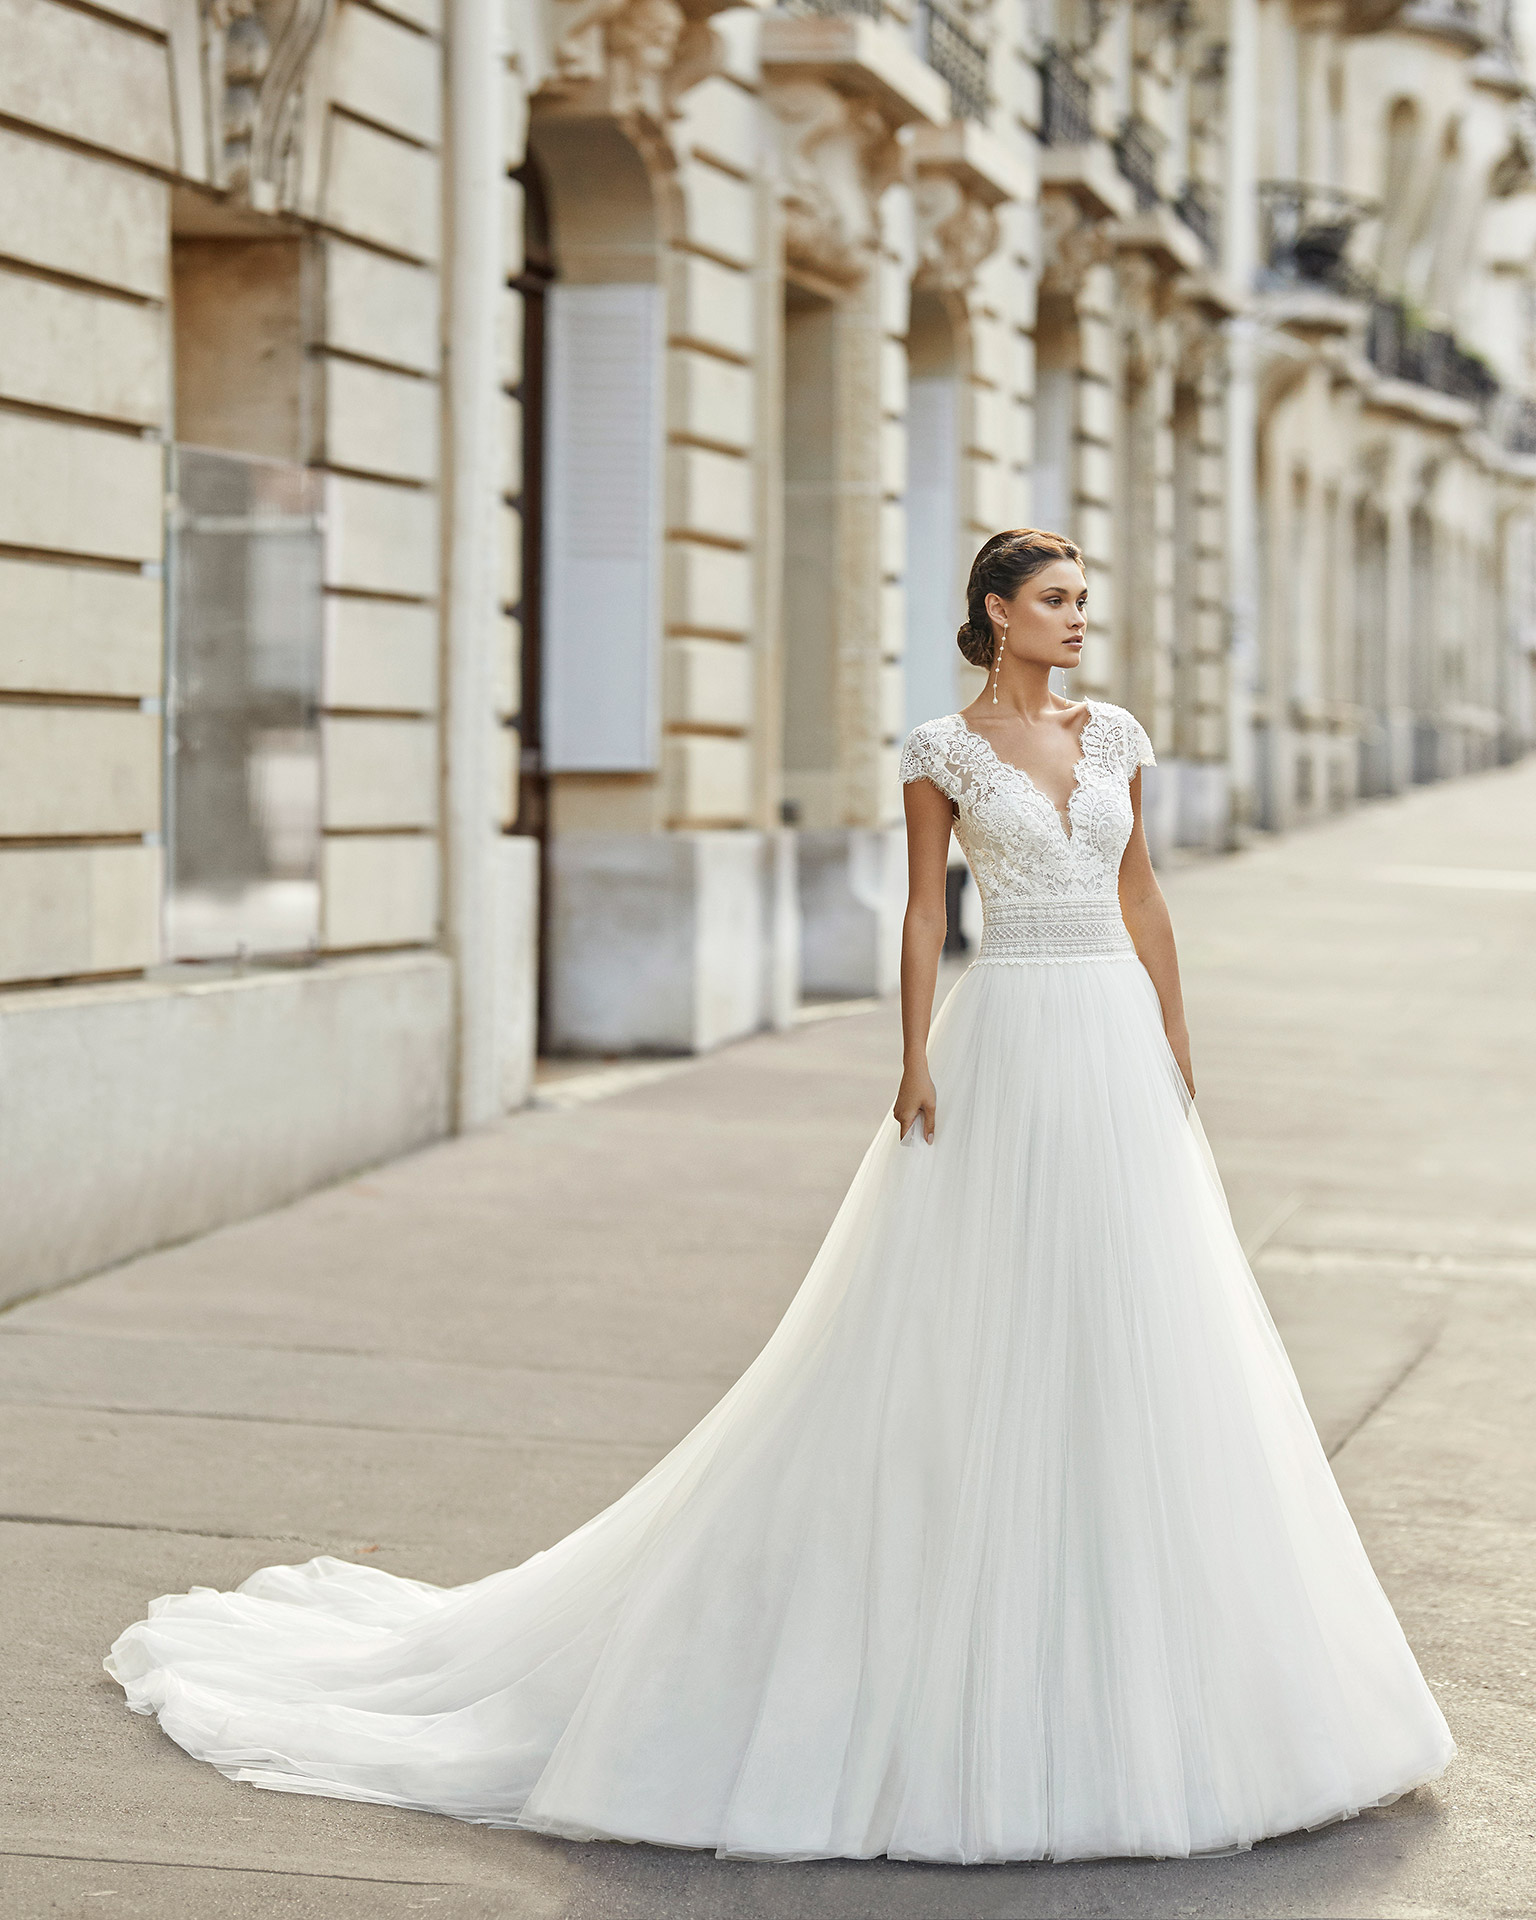 The 7 Best Wedding Dress Stores in Montreal  Voted By Brides  Vendors